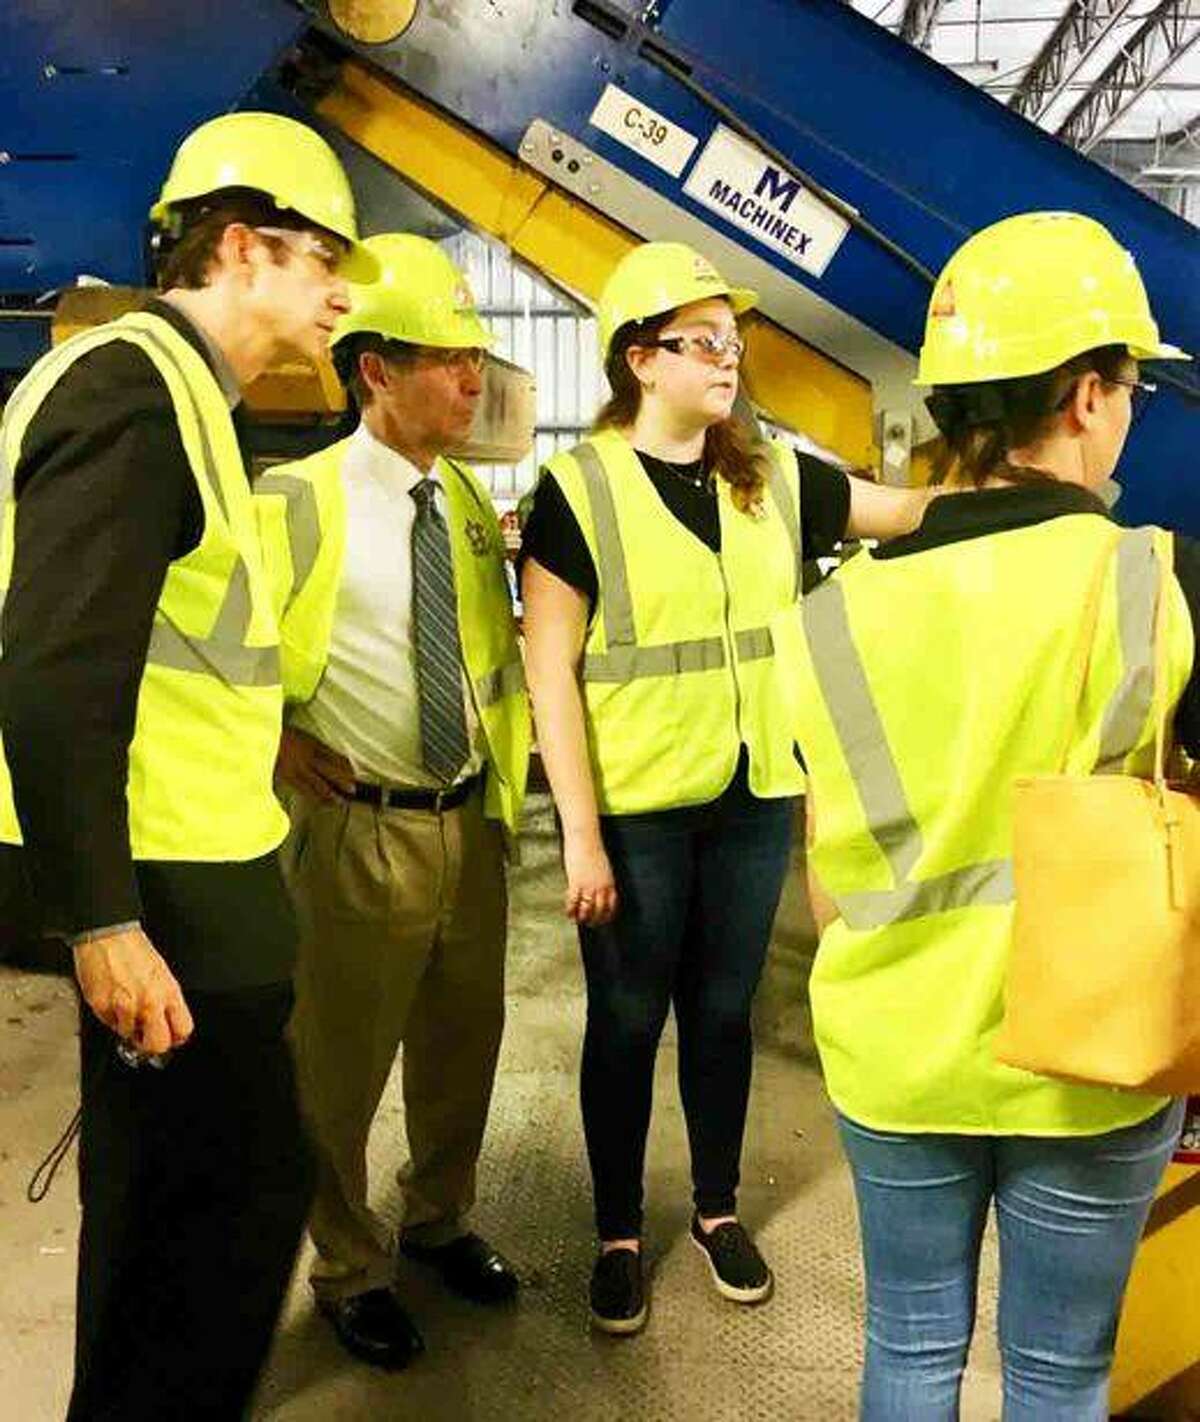 (L-R) Republic Services Leadership Trainee Megan Sexton (center) gives Madison County Chairman Kurt Prenzler a tour of Republic’s Material Recovery Facility in Hazelwood, Mo. on Friday with Planning and Development Deputy Administrator Chris Doucleff and Sustainability Coordinator Andrea Campbell Yancey. Madison County and City of Collinsville officials took the tour of the facility that recycles 300 tons of material daily